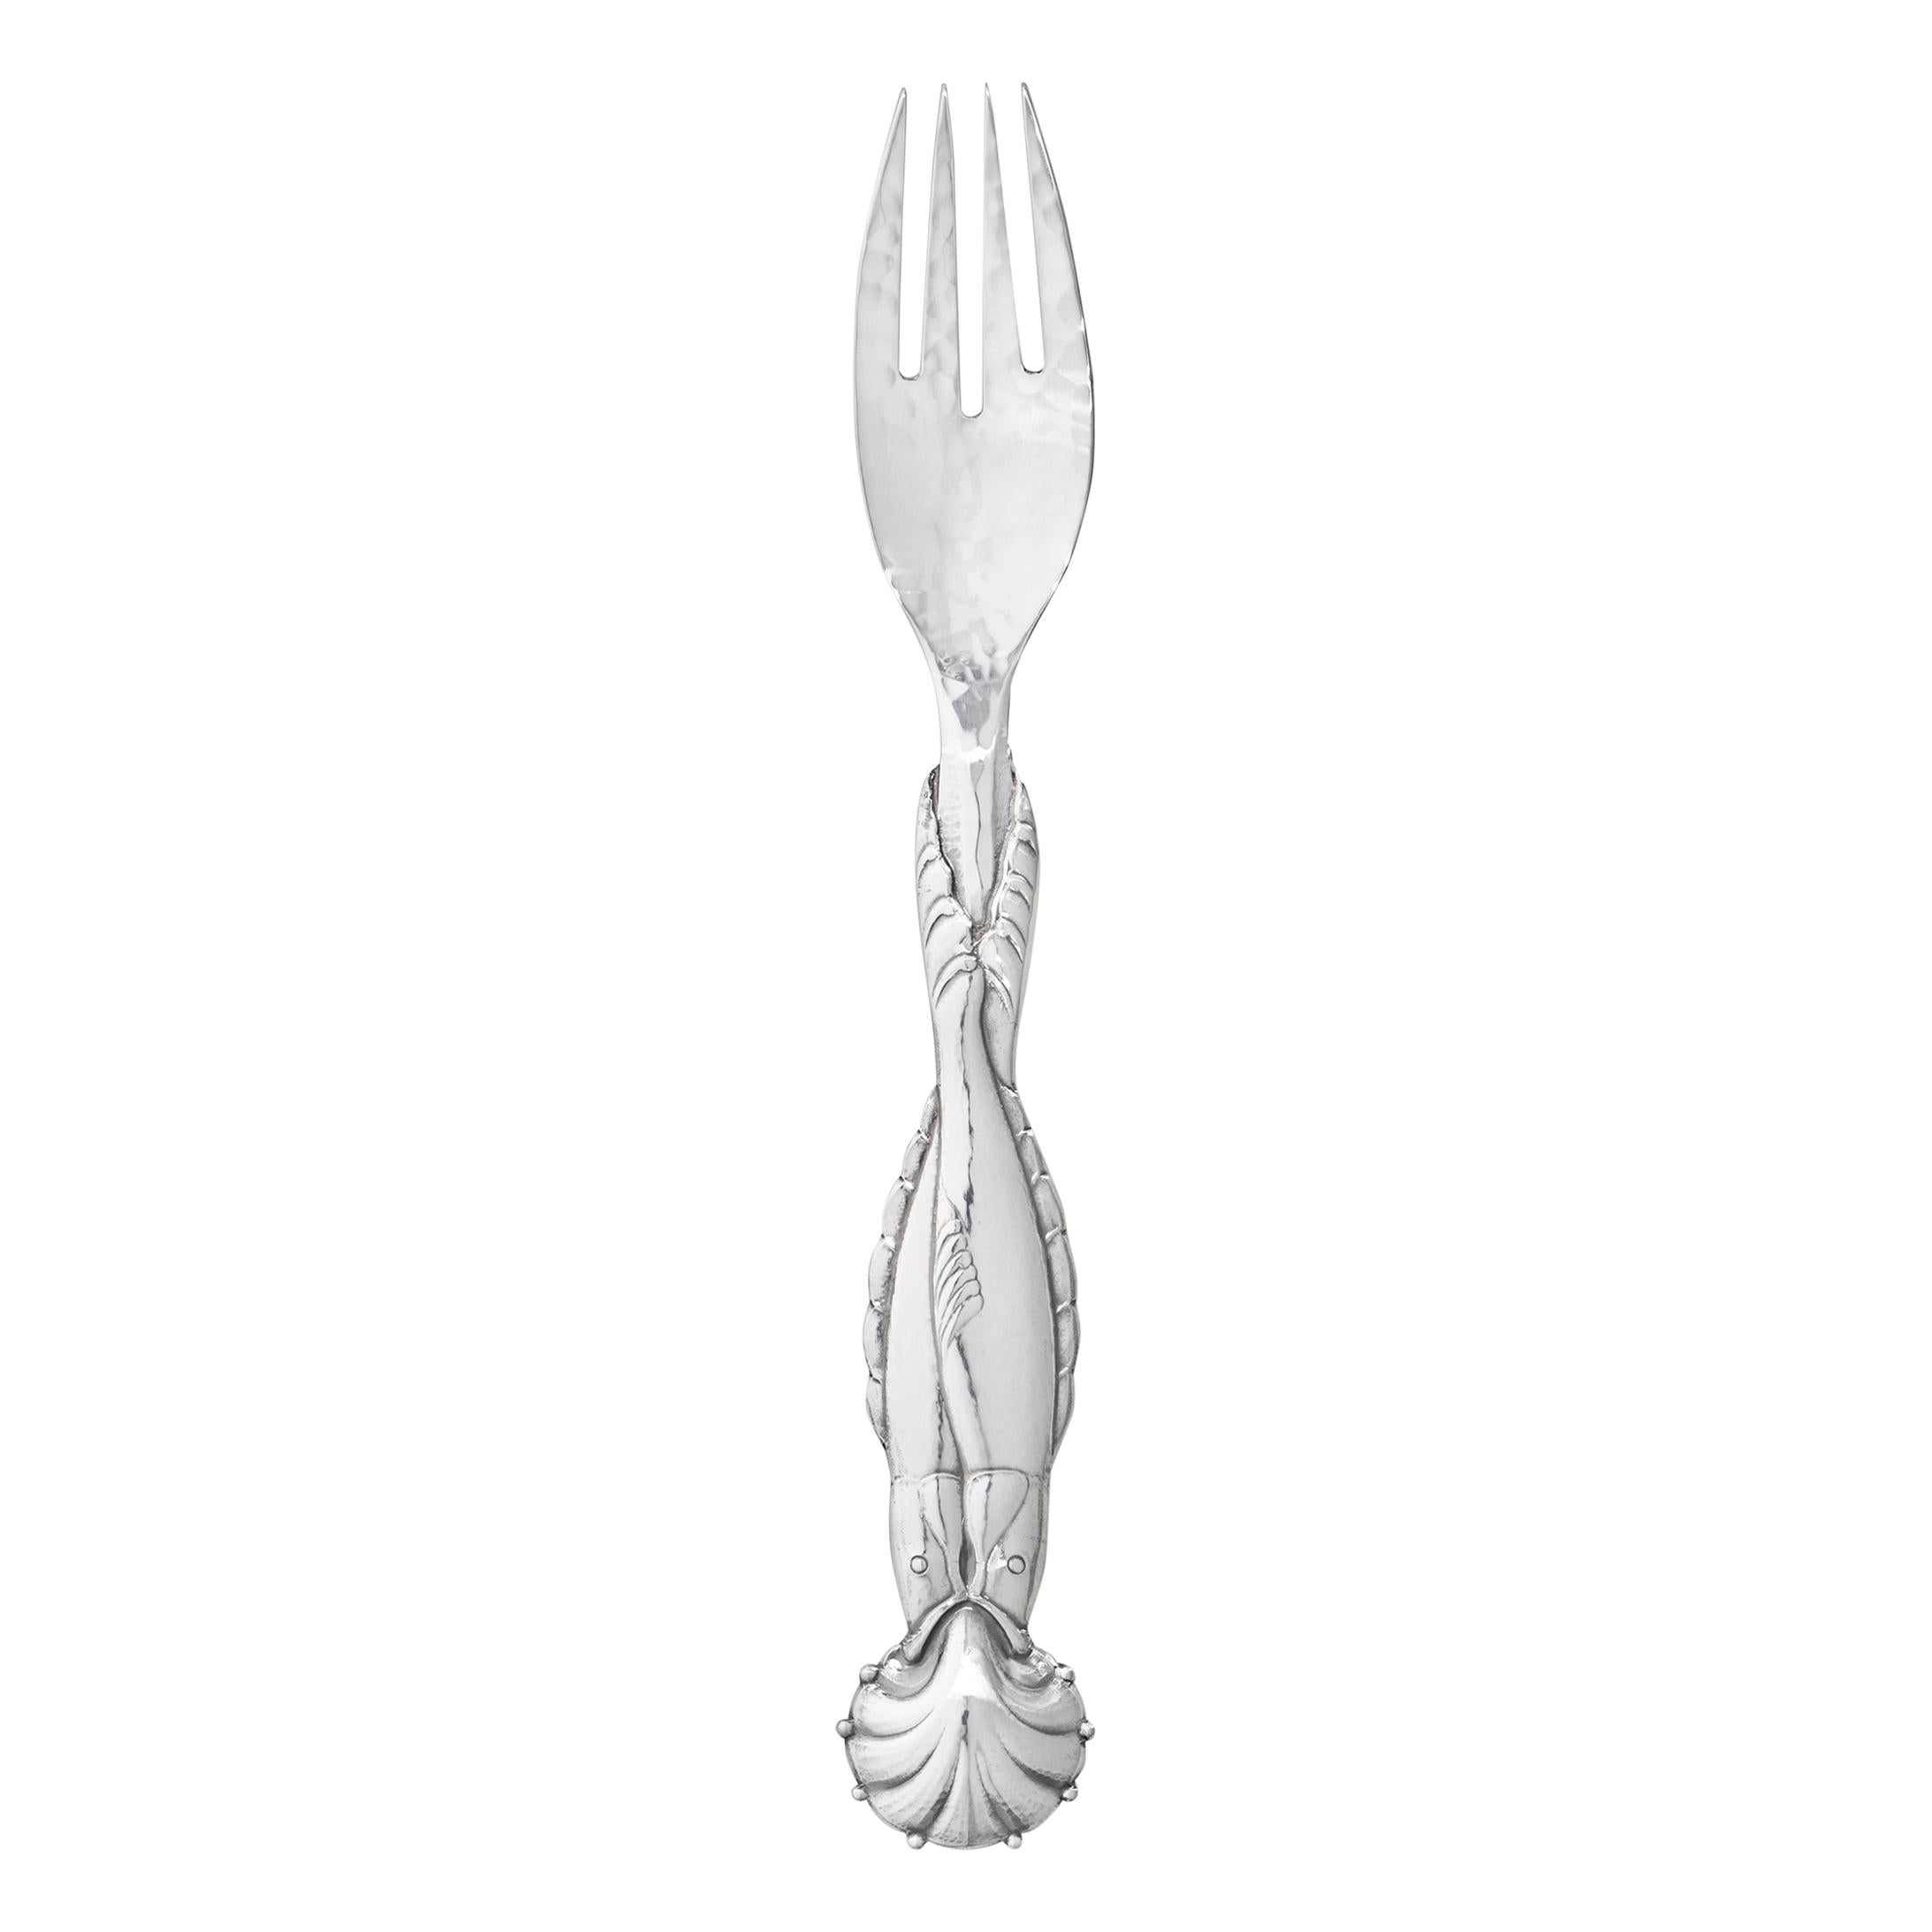 Georg Jensen Handcrafted Sterling Silver No. 55 Fork with Fish Motif